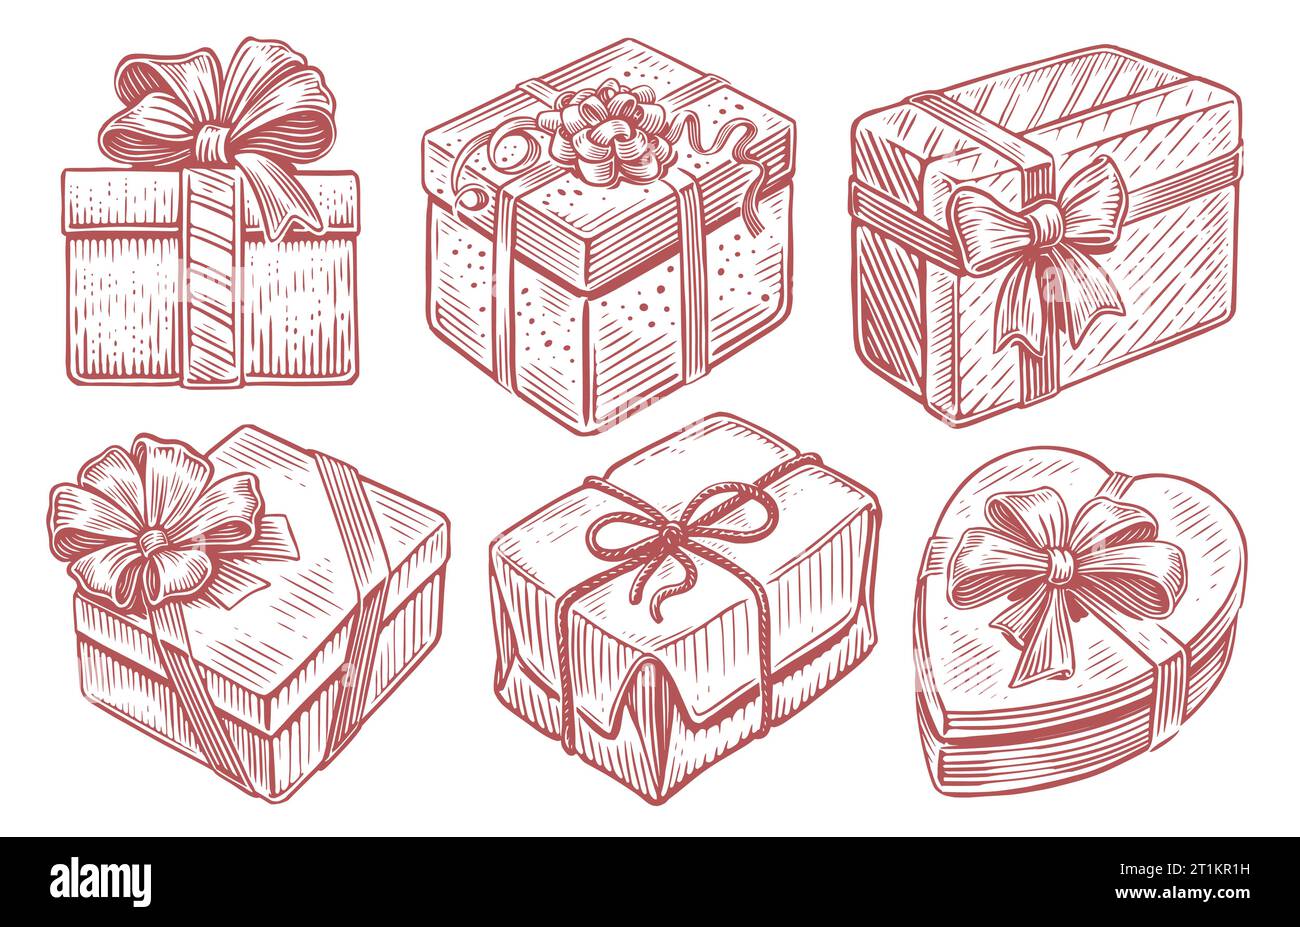 Set of Christmas gifts, holiday gift boxes with ribbons, New Year presents. Vintage sketch vector illustration Stock Vector